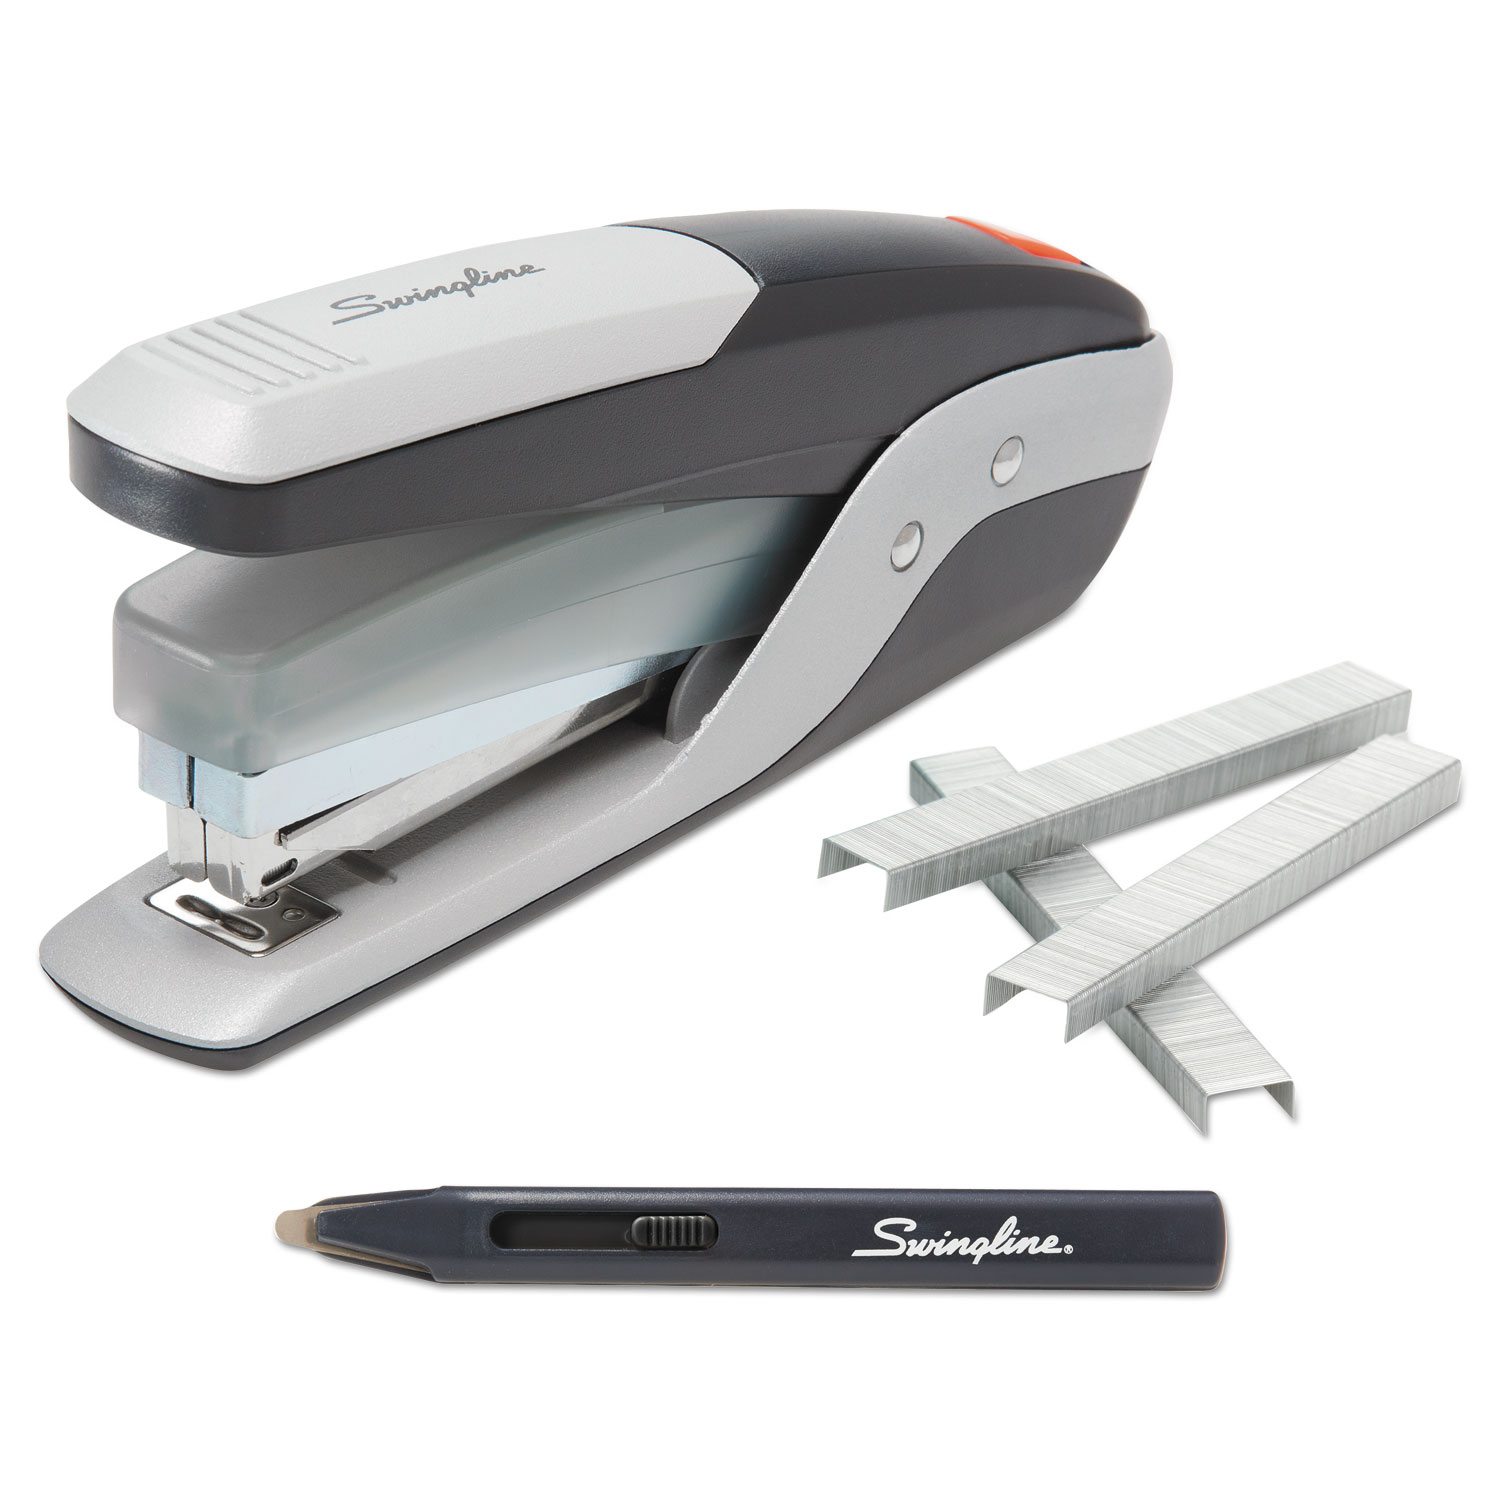  Swingline S7064580A QuickTouch Reduced Effort Full Strip Stapler with 5,000 Staples, 28-Sheet Capacity, Black/Silver (SWI64580) 